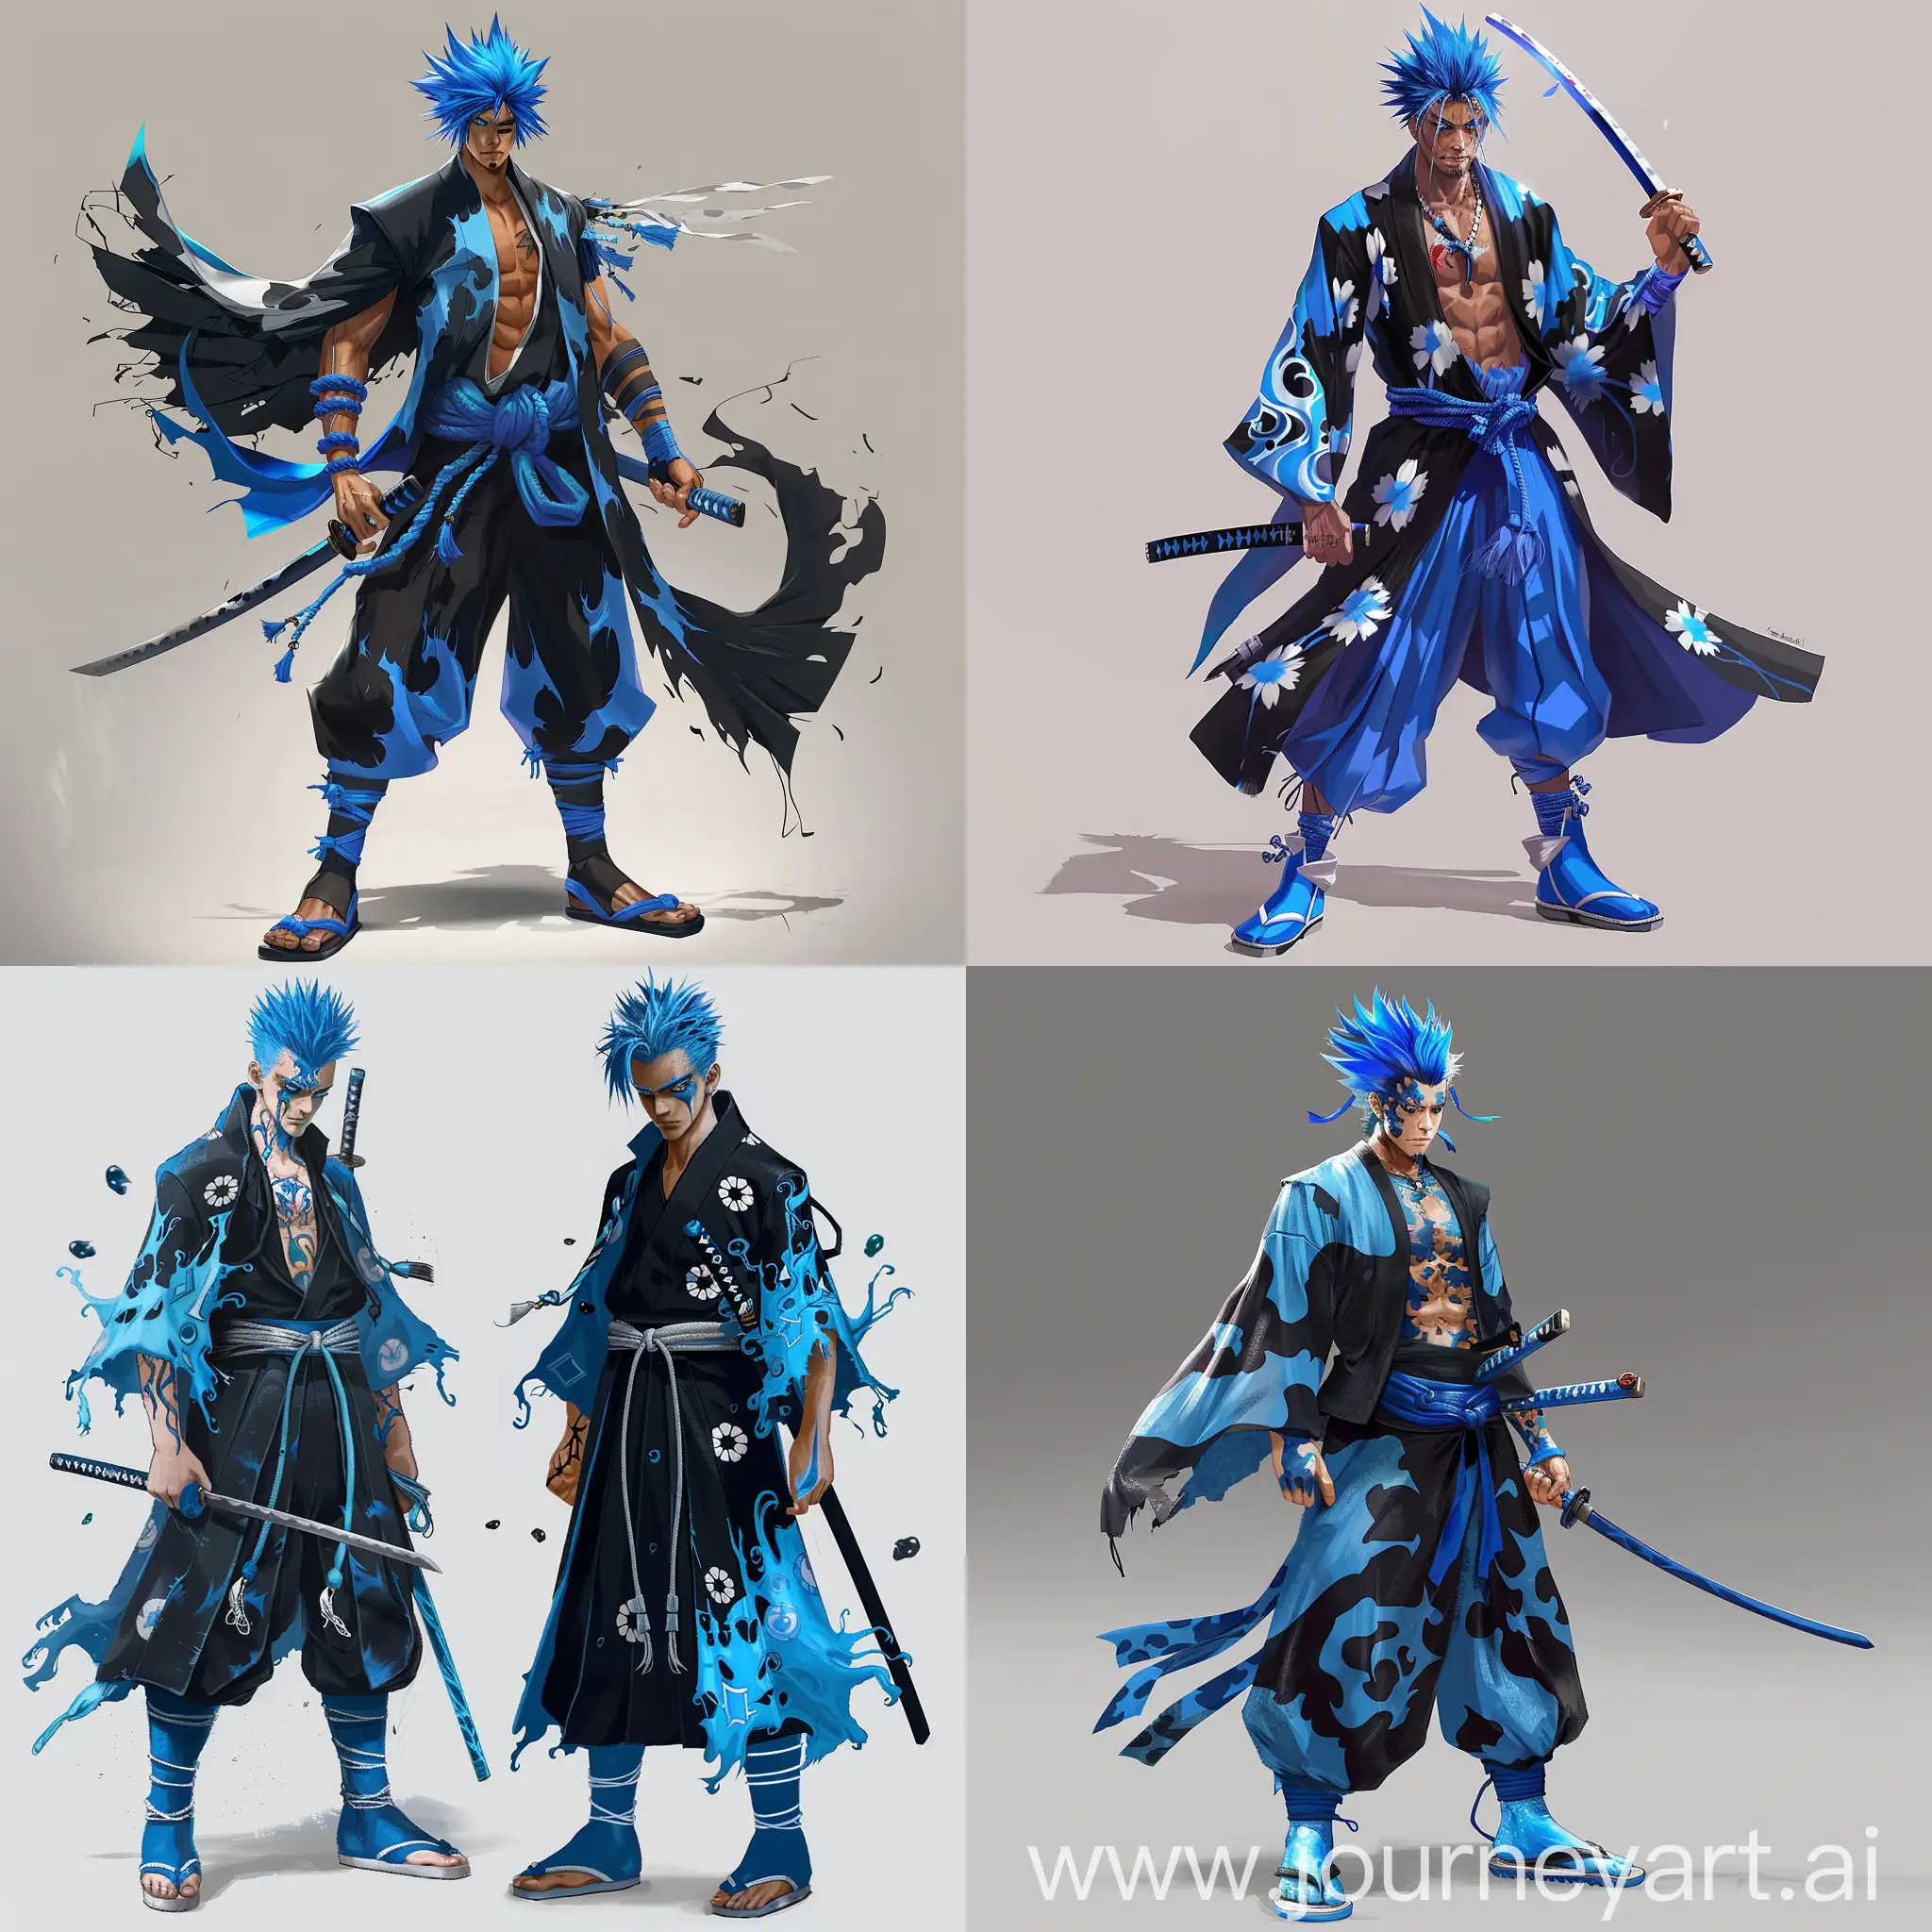 Create a detailed character concept art featuring a man with  blue hair, Blue shoes, bleach style black and blue costume and a katana in hand 